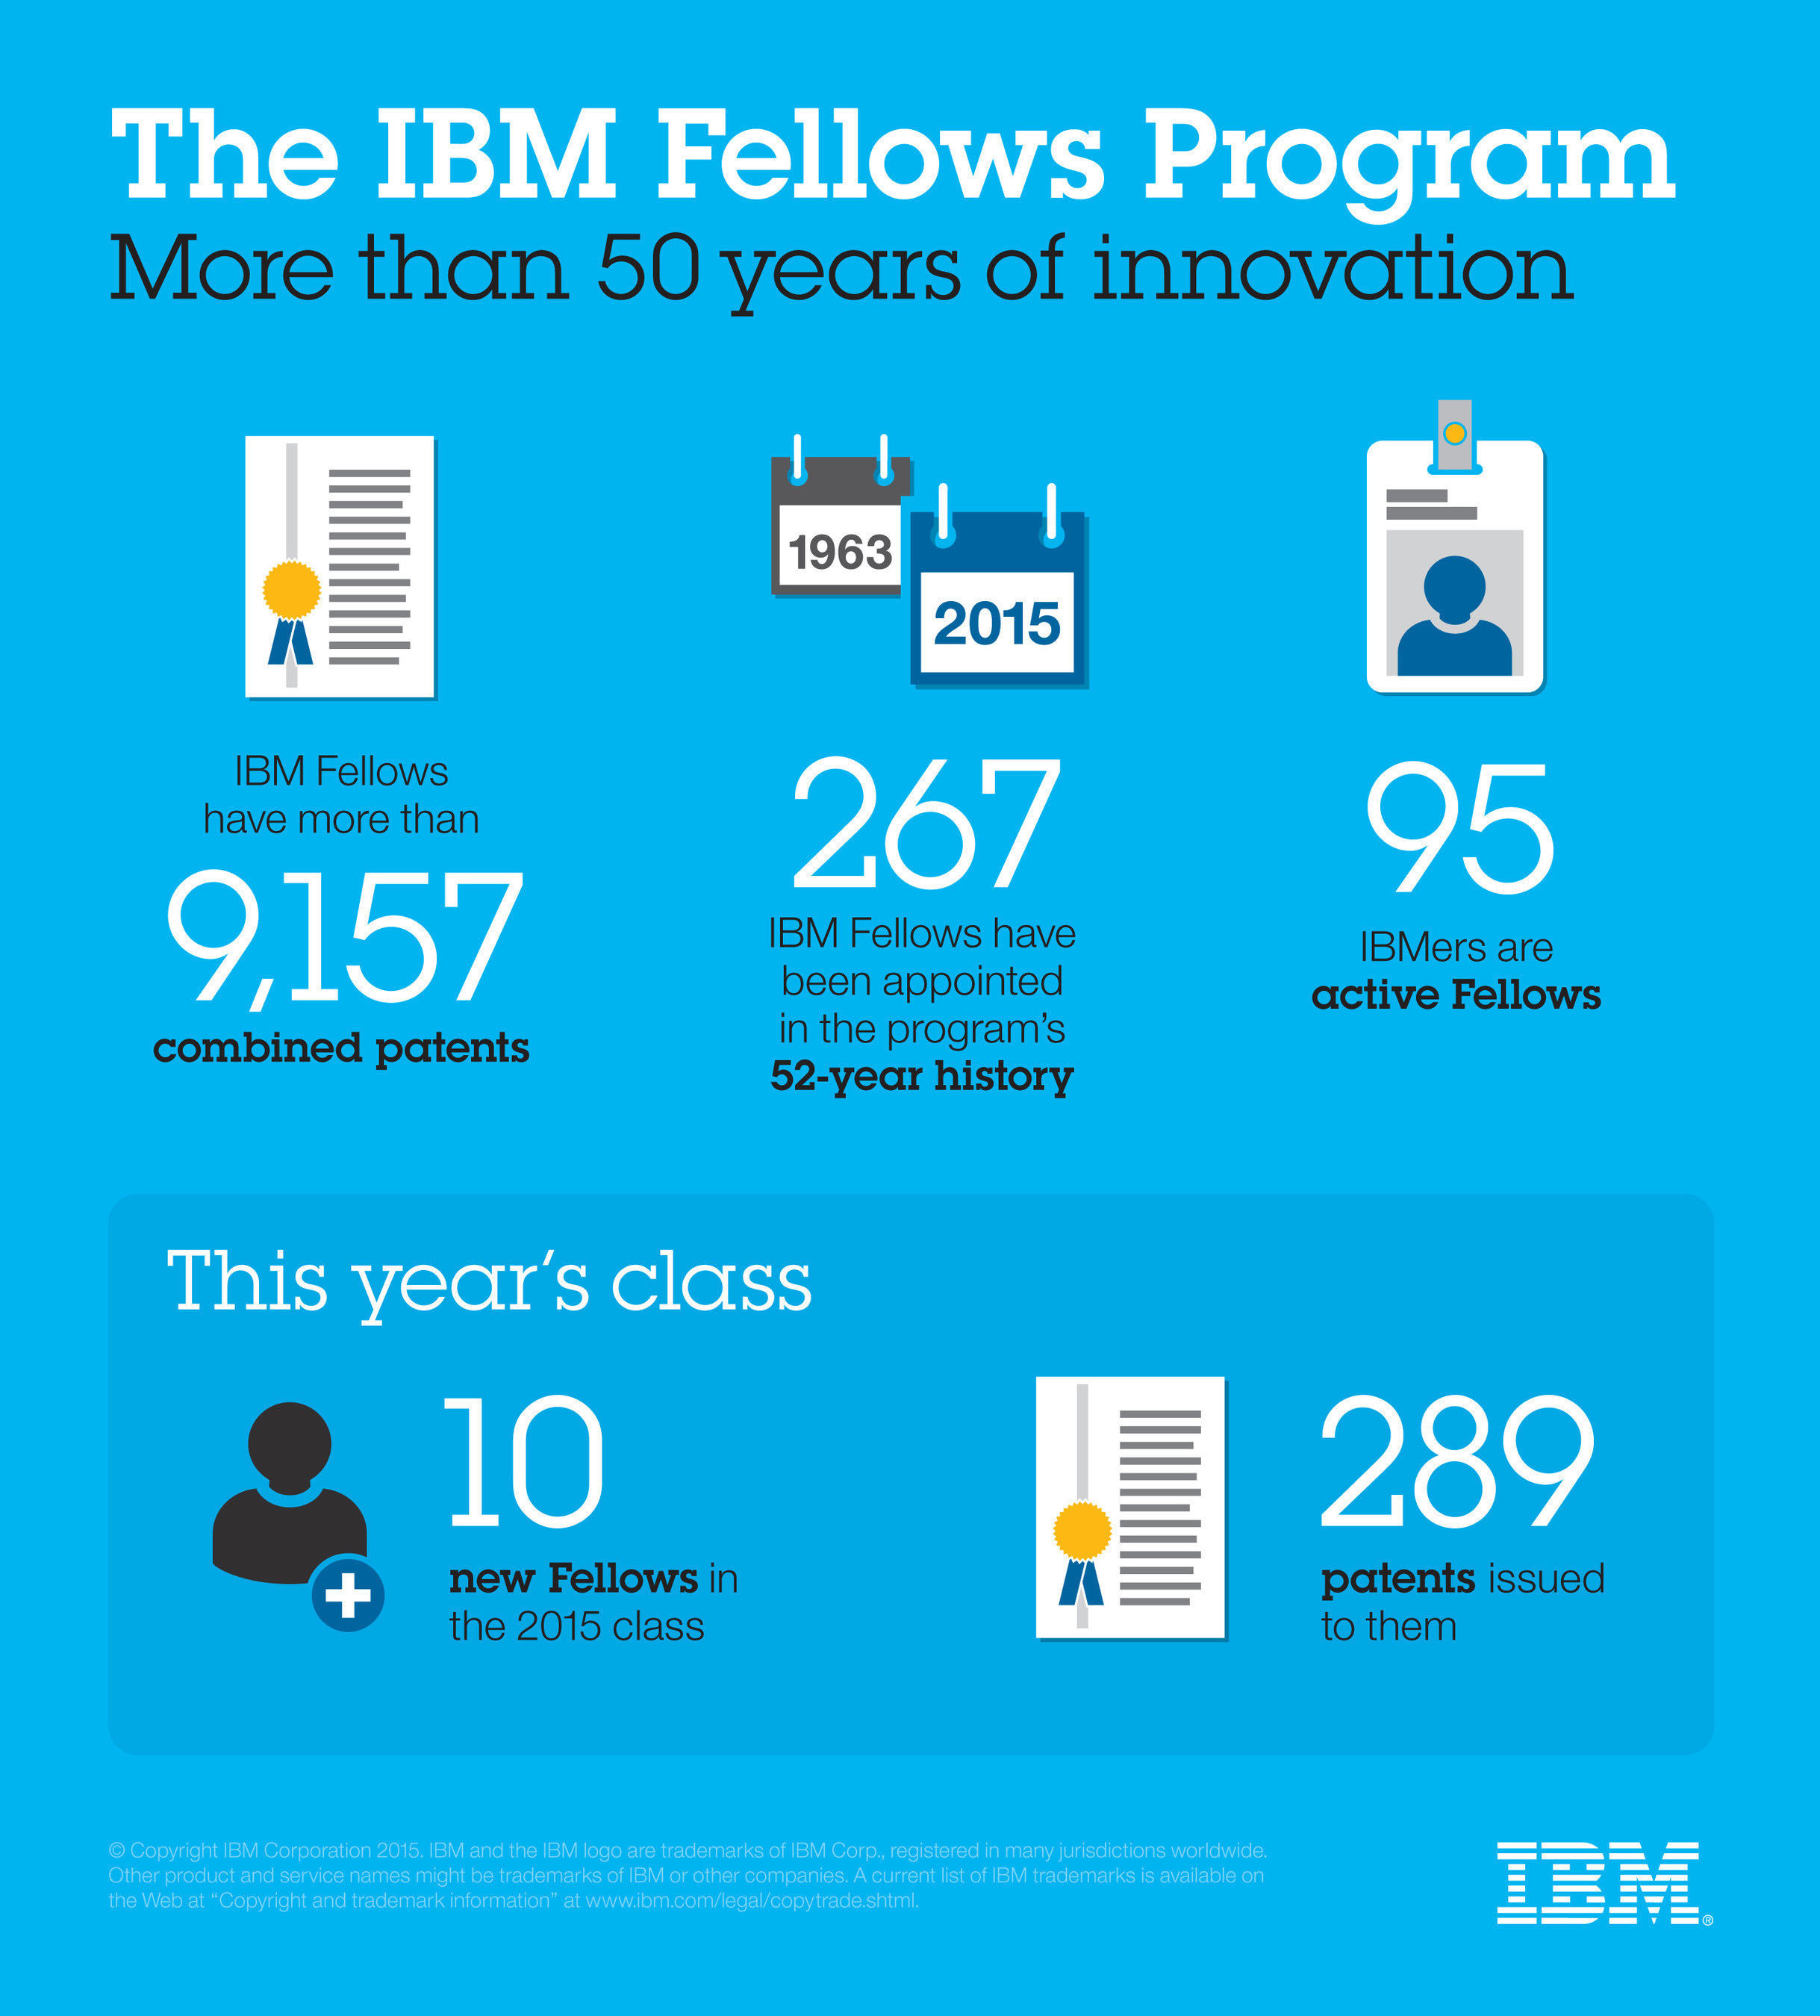 Meet the class of 2015, and their place in IBM history.